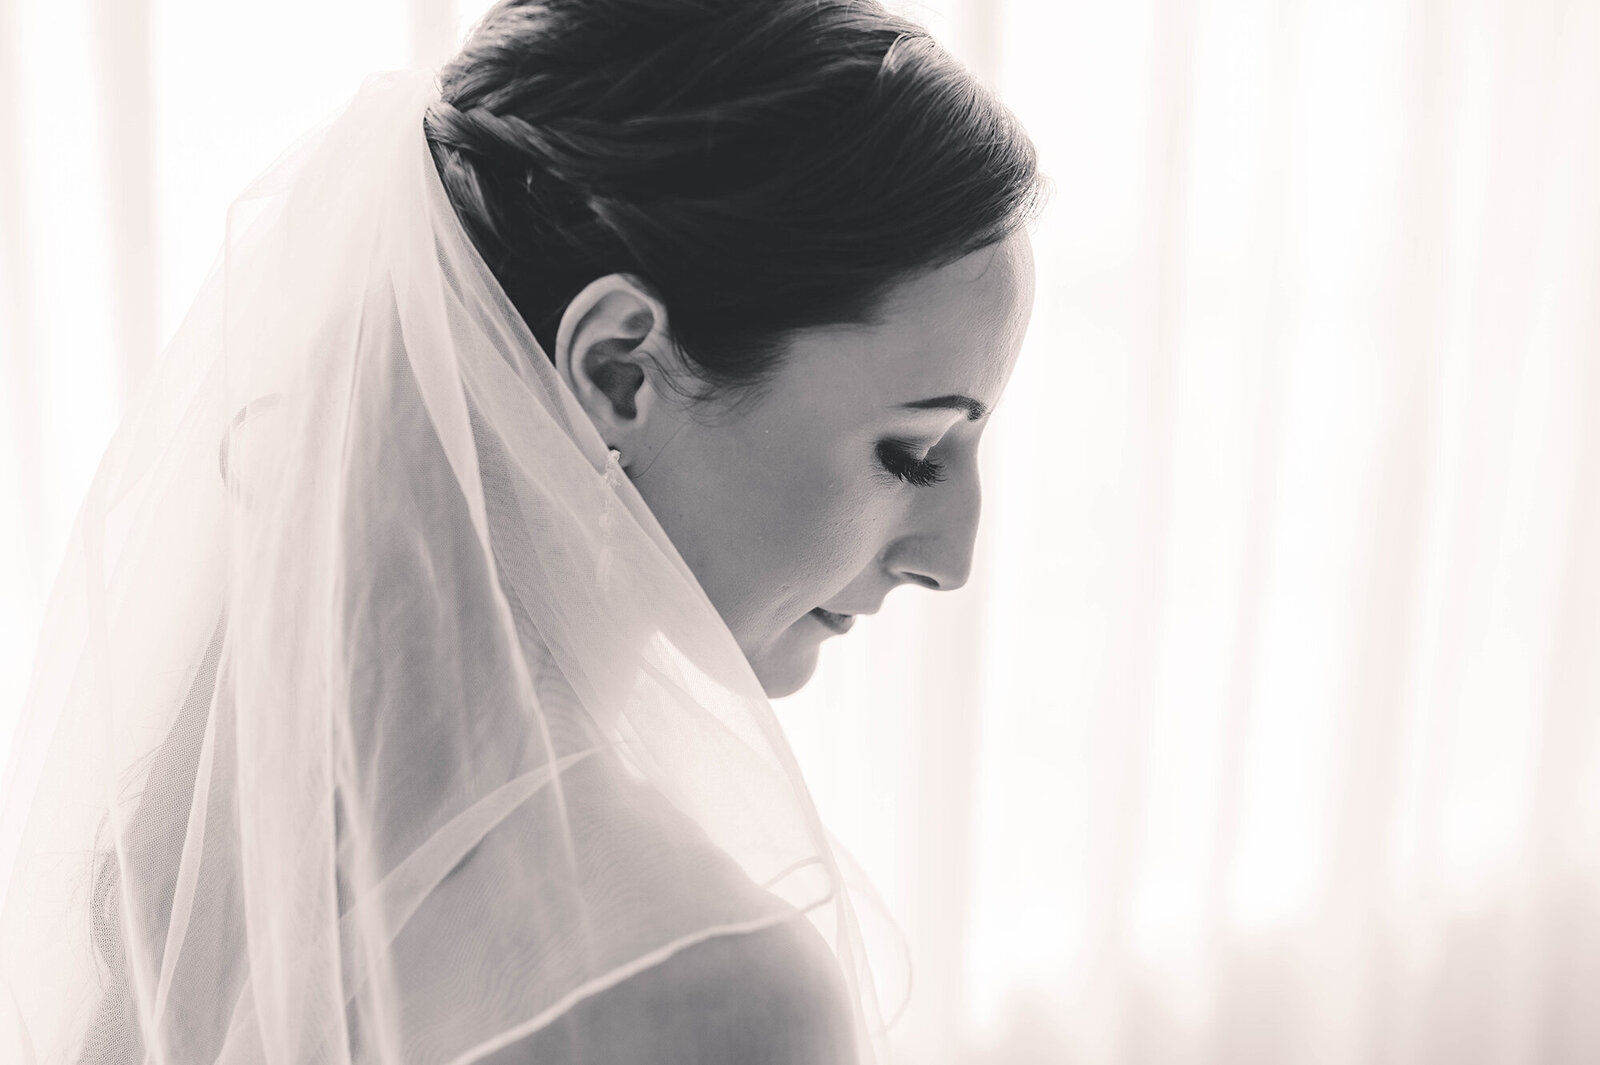 Bride awaits her micro wedding ceremony in Cancun, Mexico.